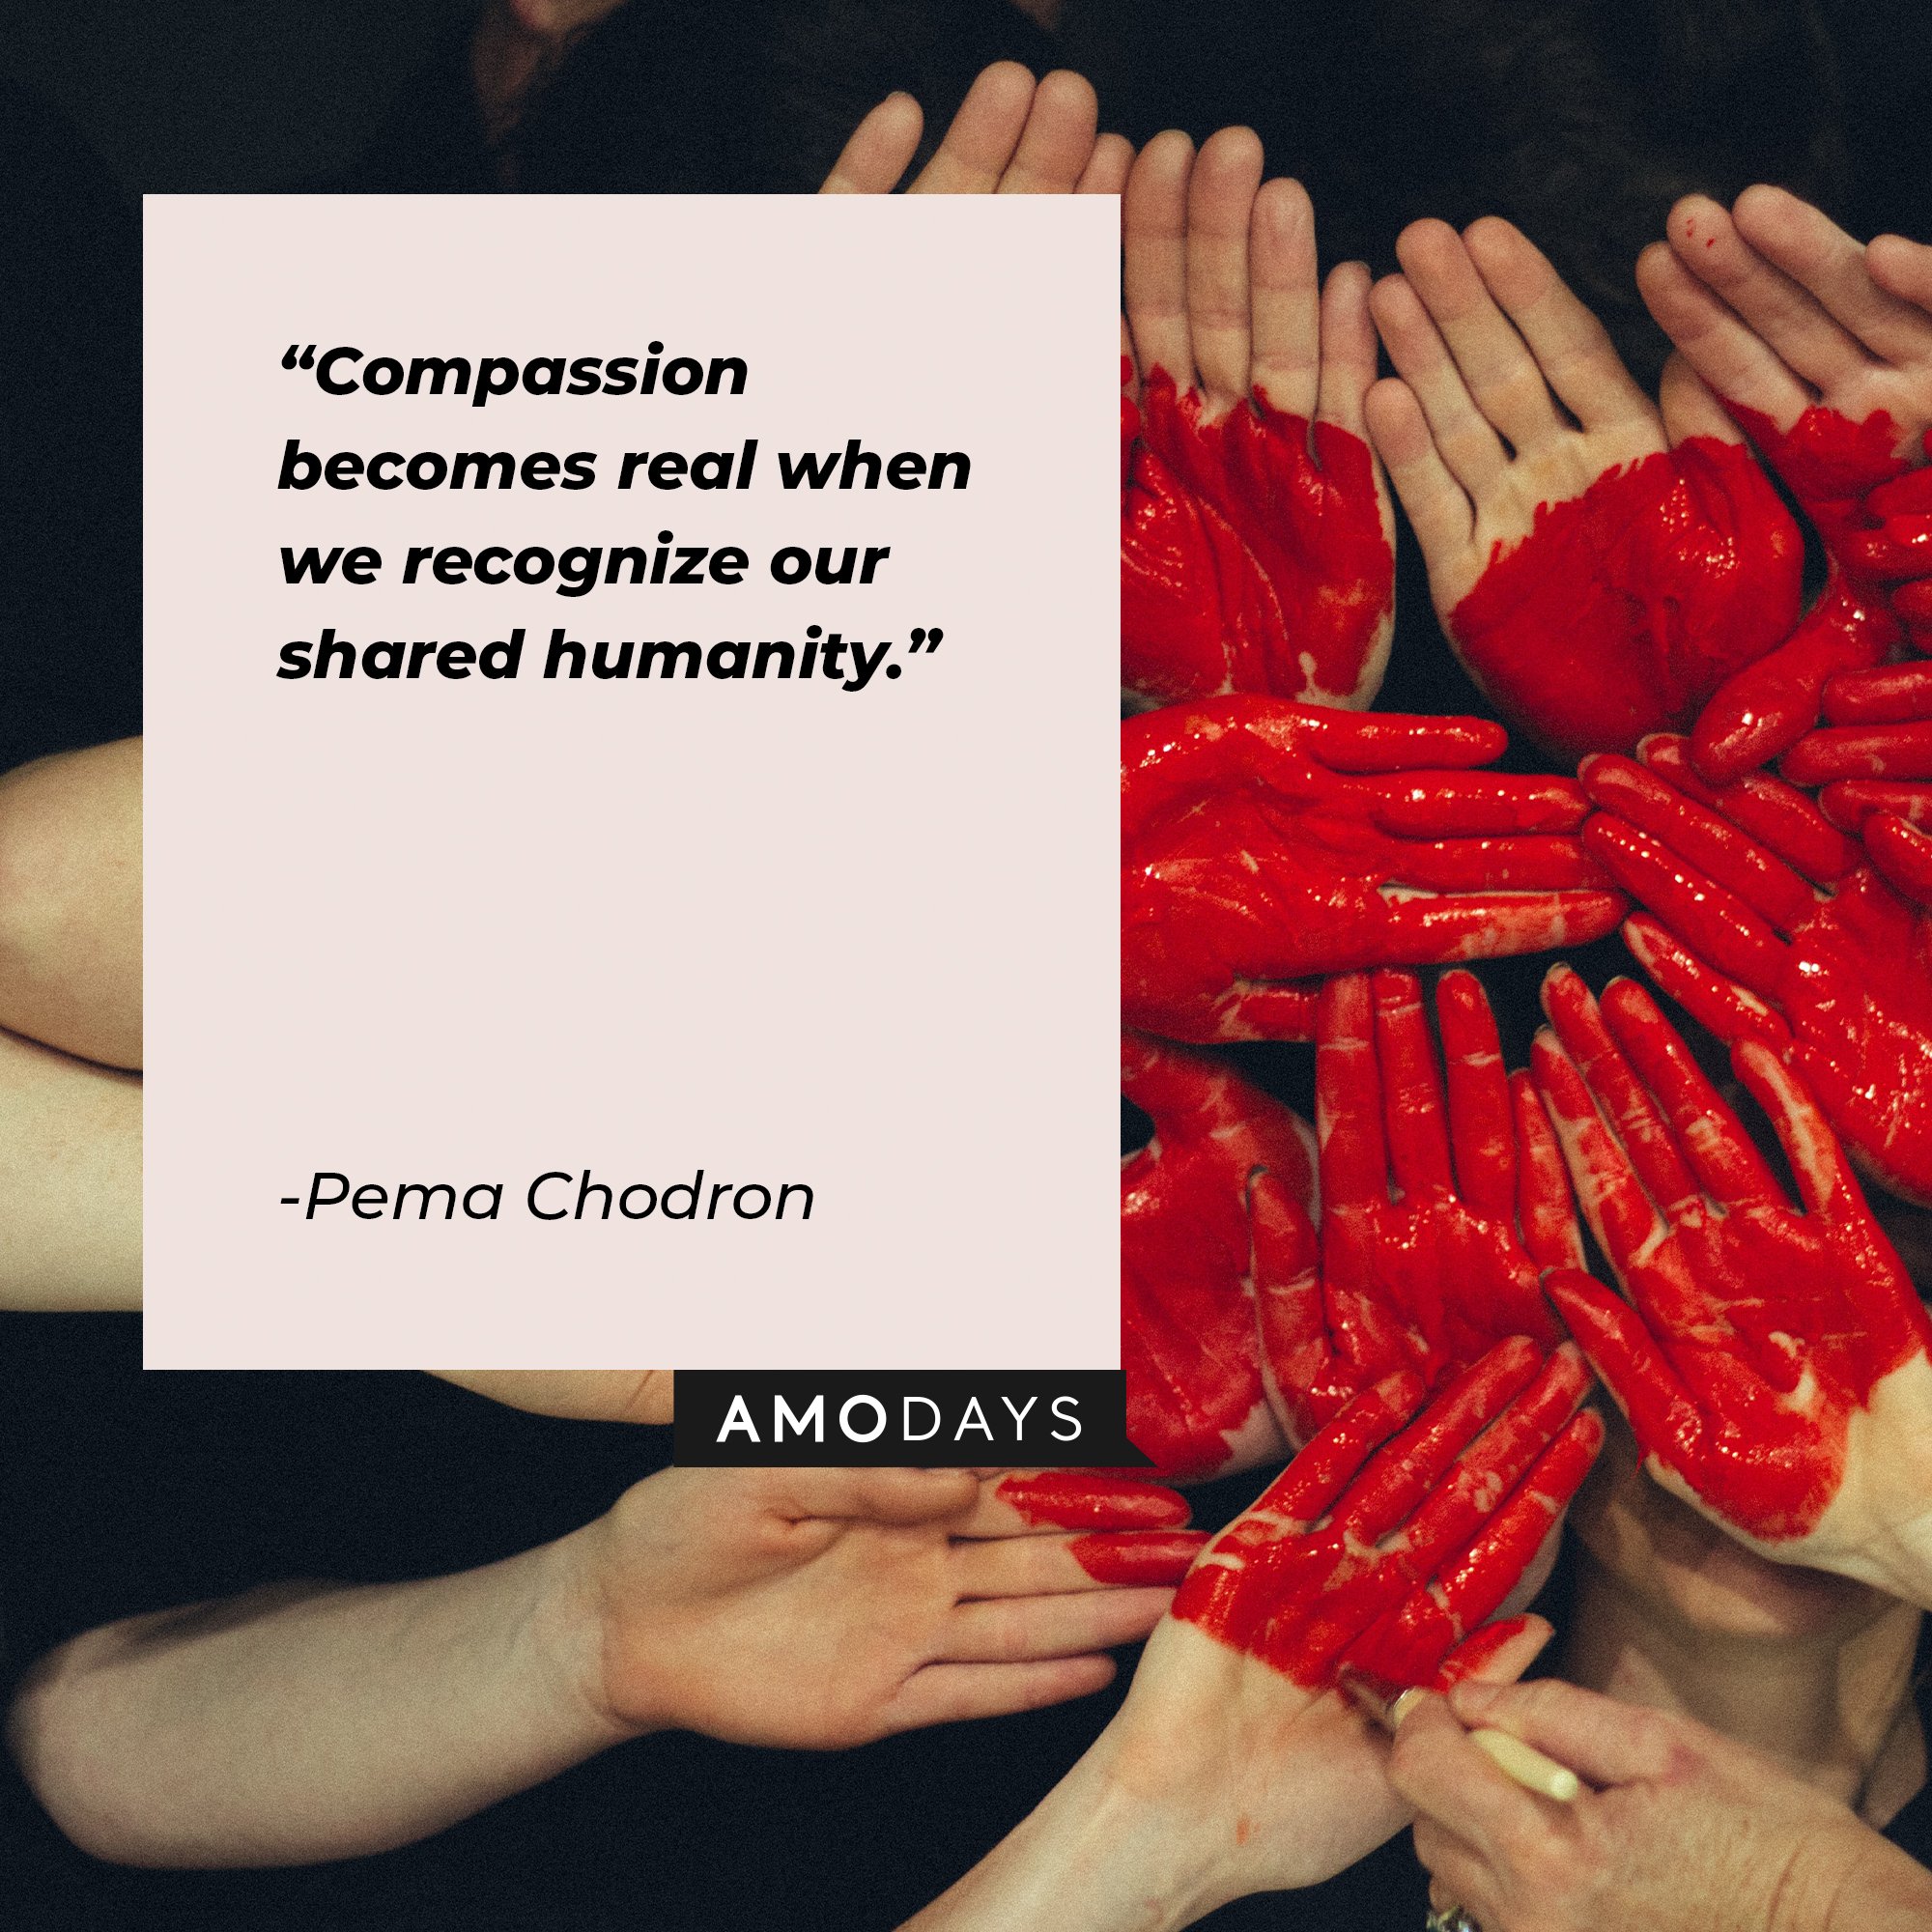 Pema Chodron’s quote: "Compassion becomes real when we recognize our shared humanity." | Image: AmoDays